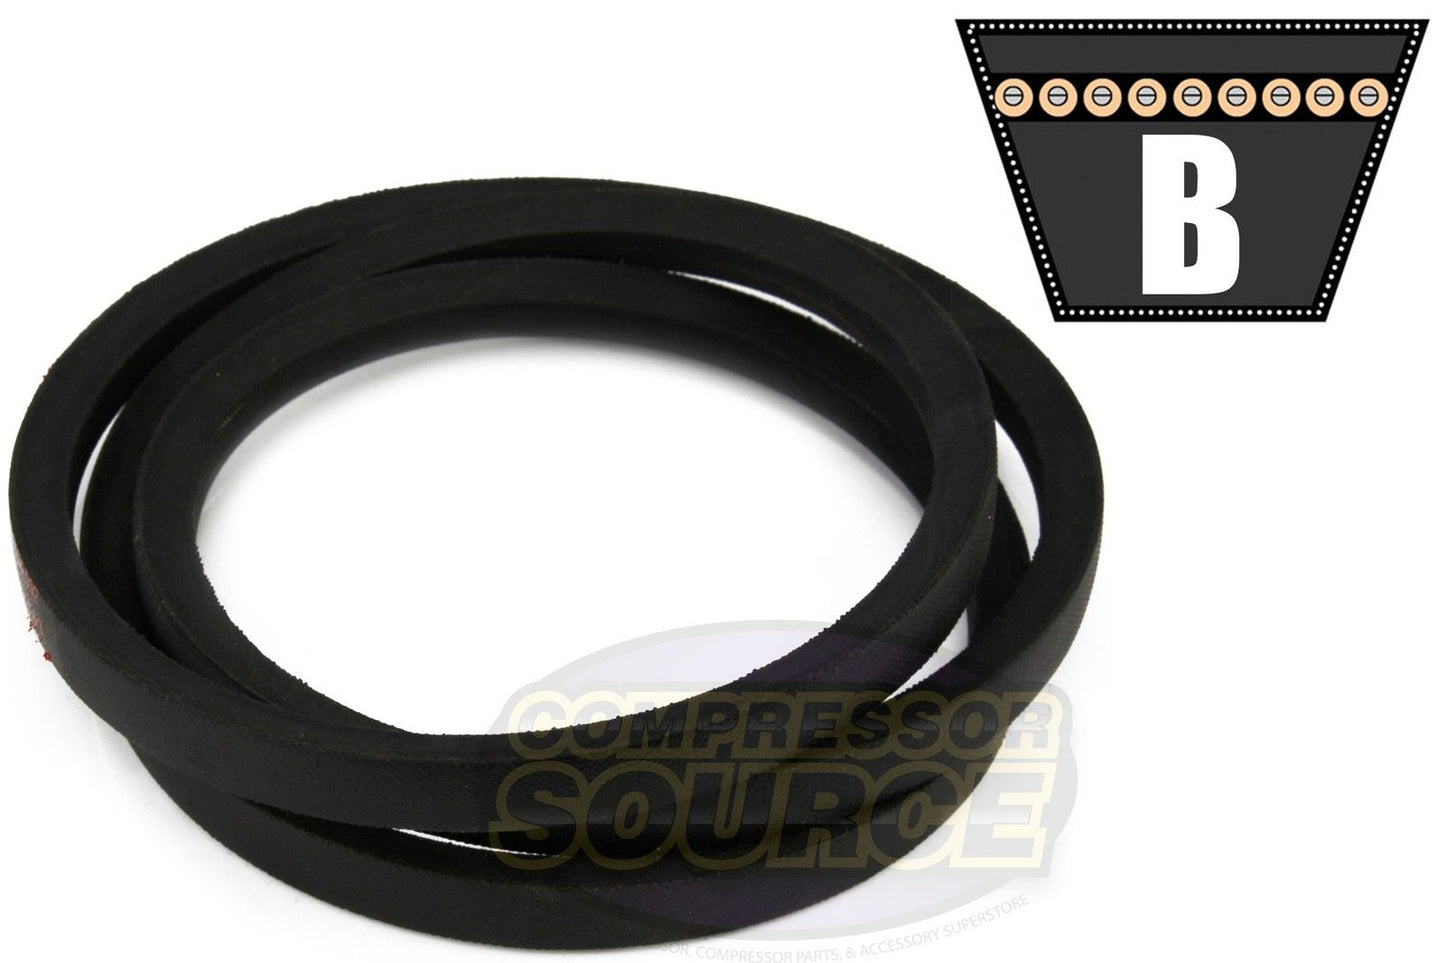 B82 Replacement High Quality Industrial & Lawn Mower 5/8" x 85"  V Belt 5L850